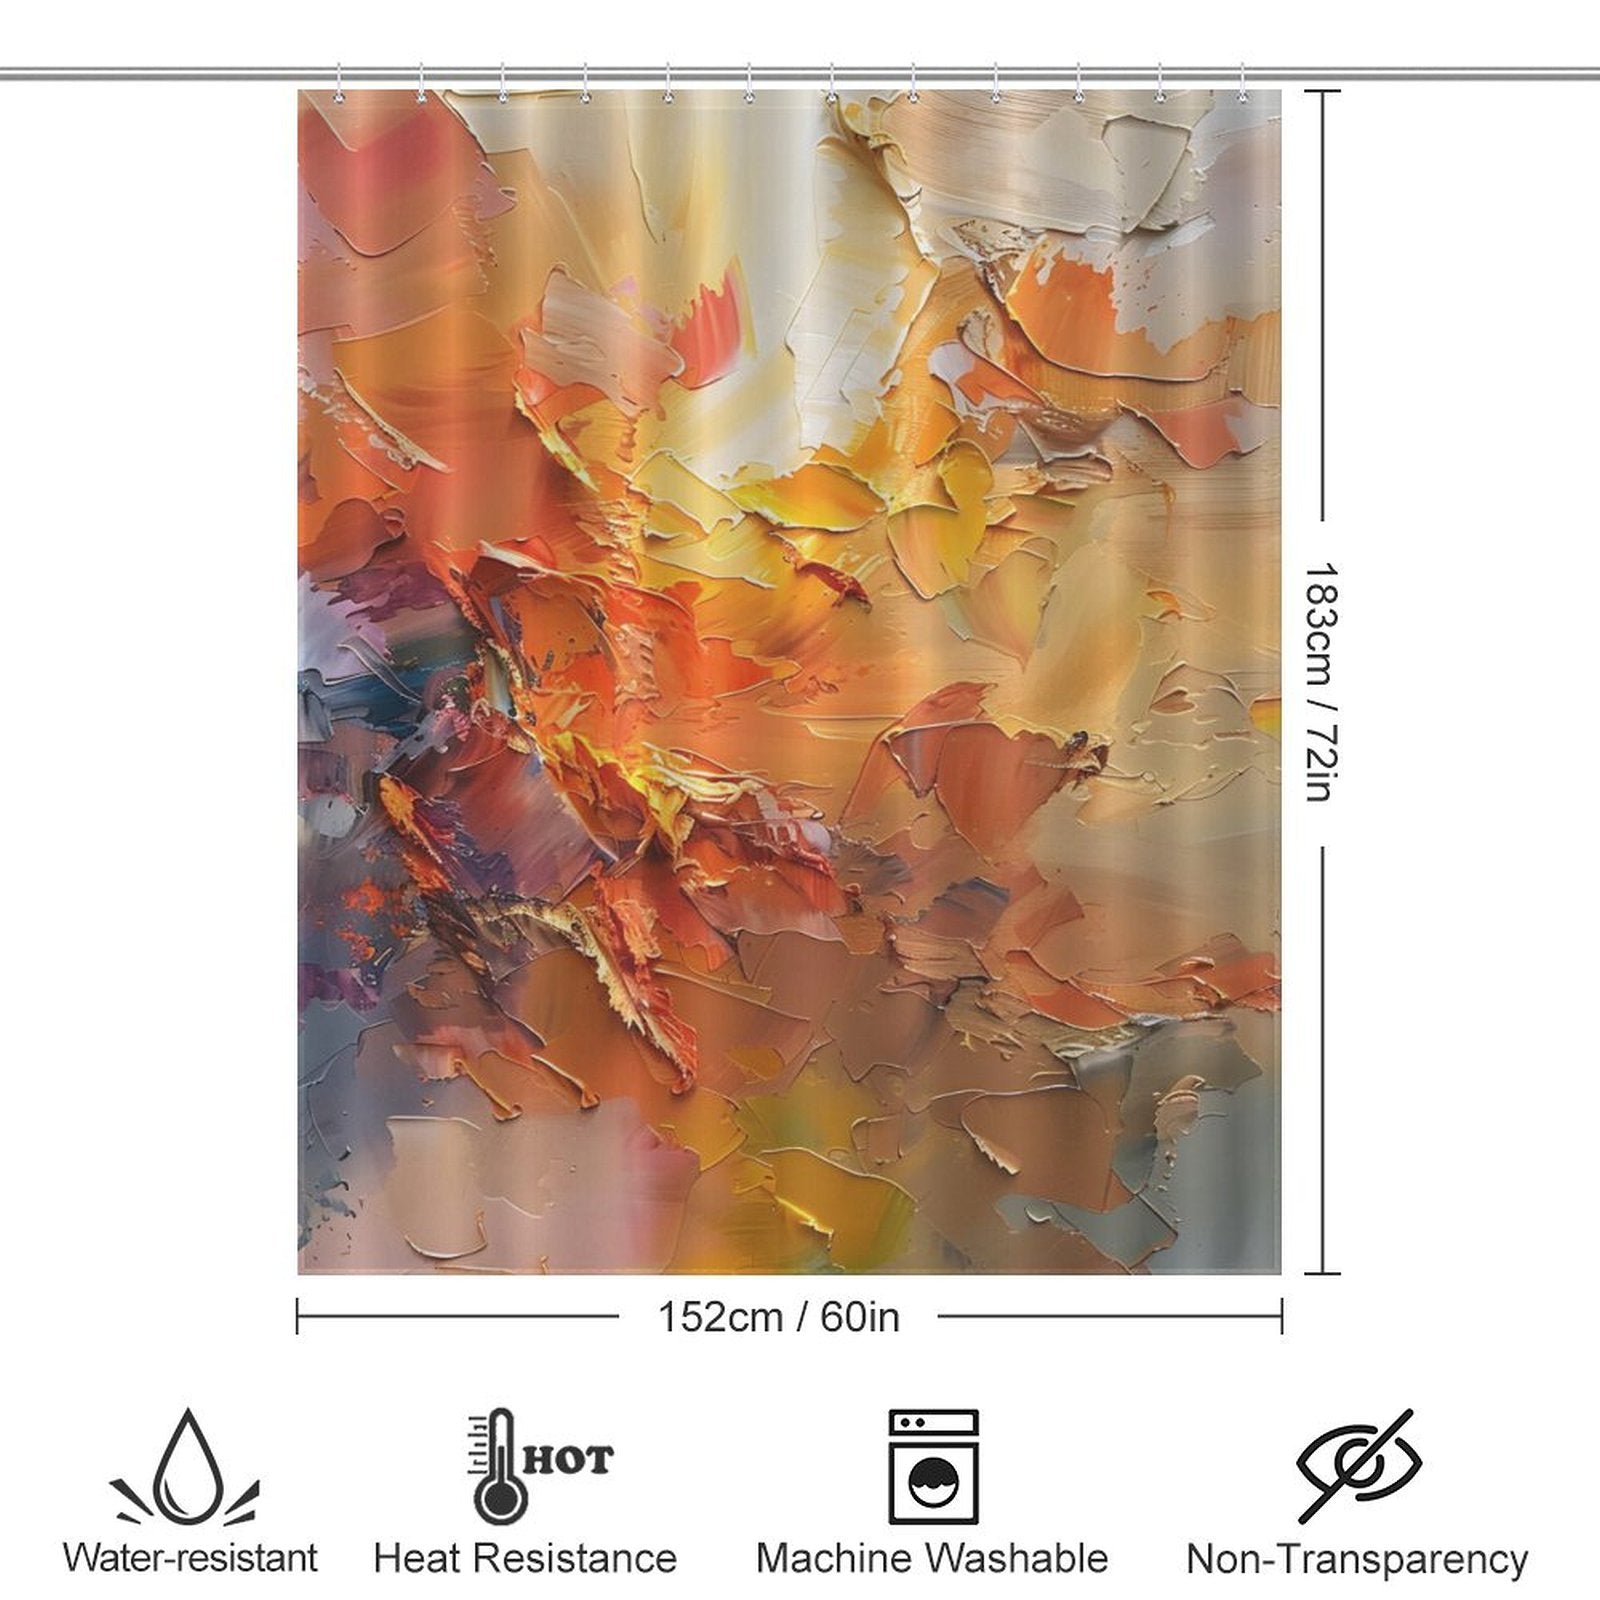 A Cotton Cat Burnt Orange Abstract Oil Painting Modern Art Yellow Blue Brushstrokes Shower Curtain-Cottoncat depicting abstract art with swirling red, burnt orange, and yellow hues. The curtain is 183 cm by 152 cm, water-resistant, heat resistant, machine washable, and non-transparent.